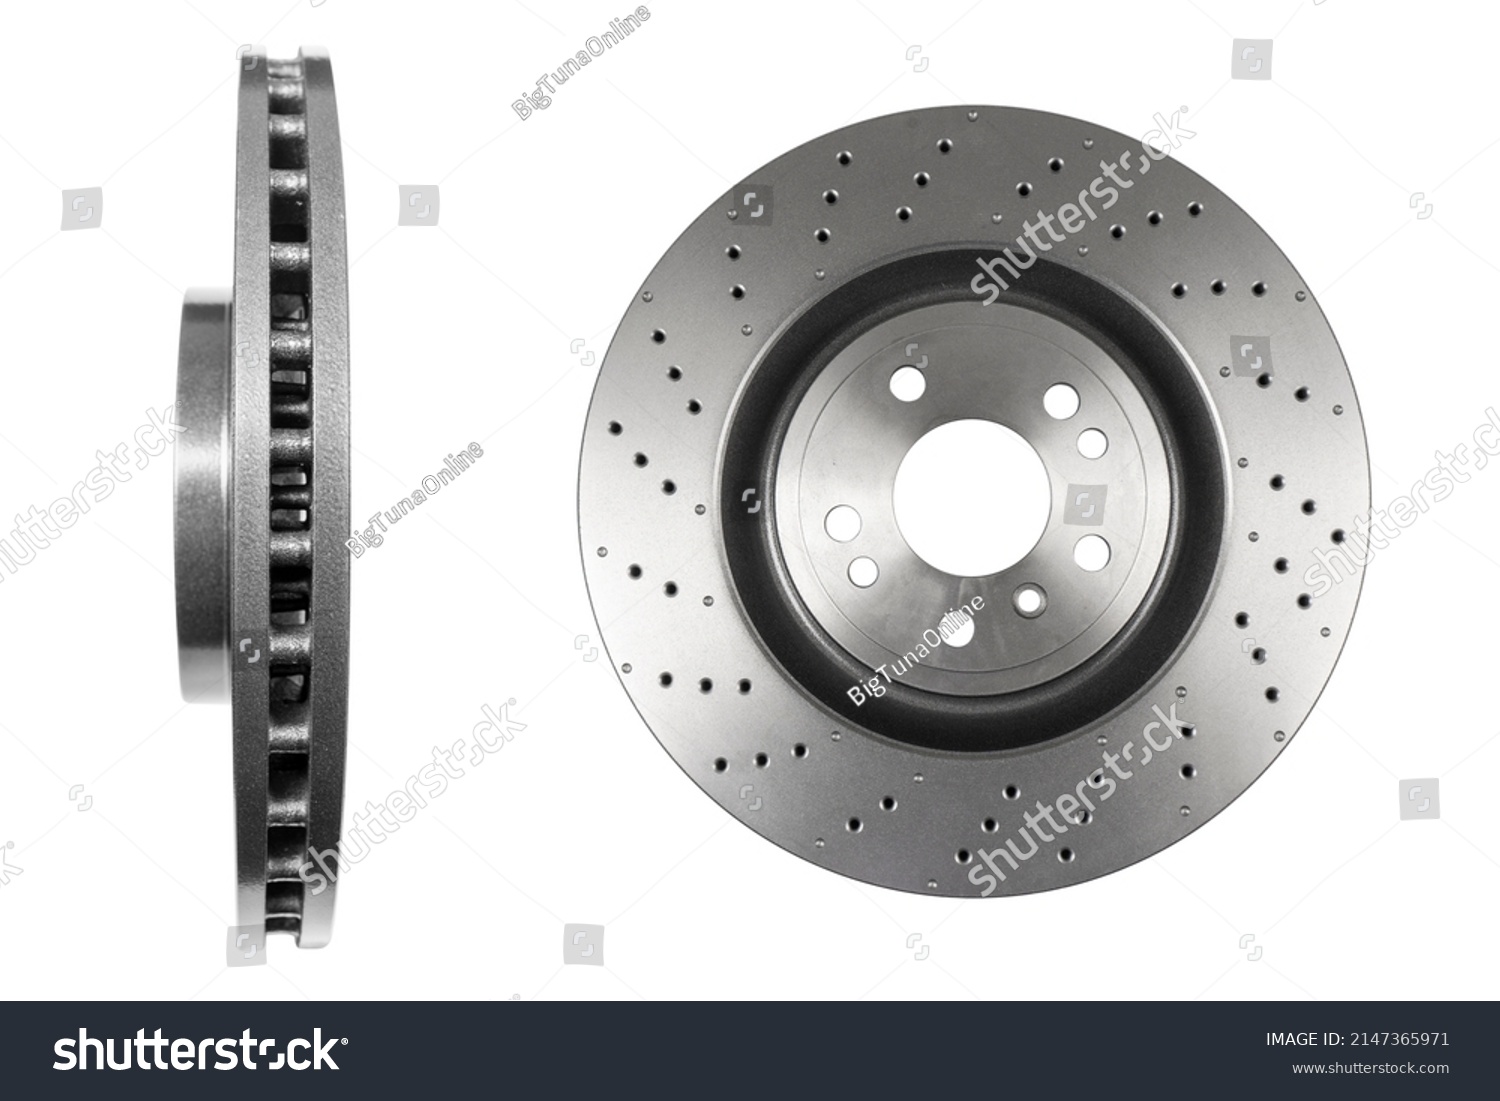 Car brake disc isolated on white background. Auto spare parts. Perforated brake disc rotor isolated on white. Braking ventilated discs. Quality spare parts for car service or maintenance #2147365971